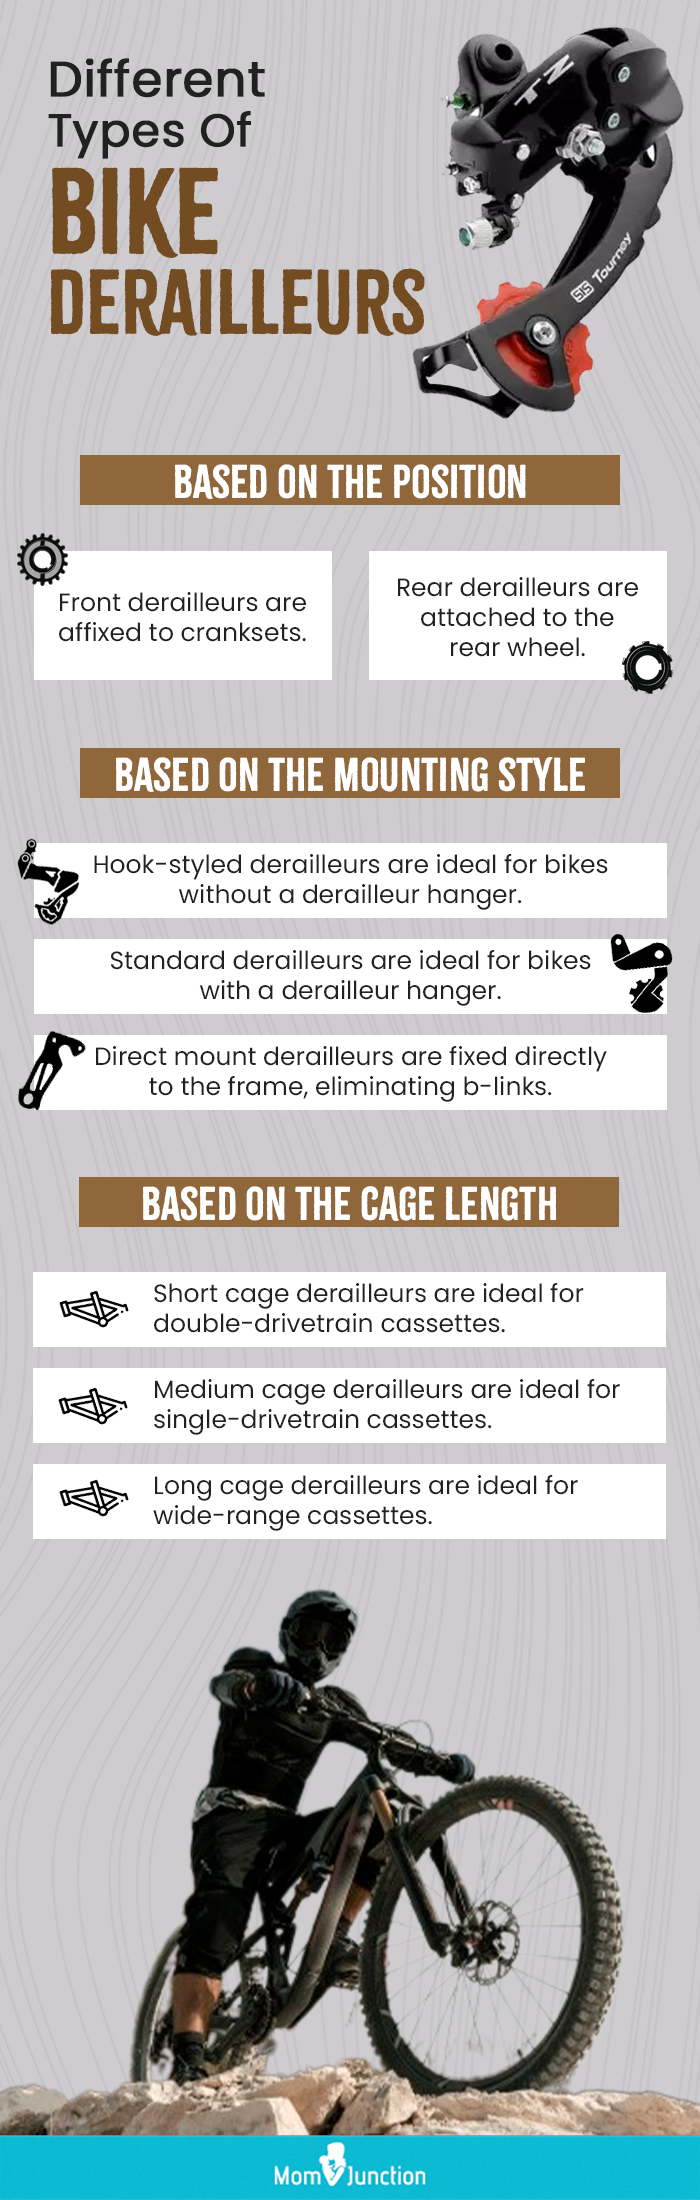 Different Types Of Bike Derailleurs (infographic)